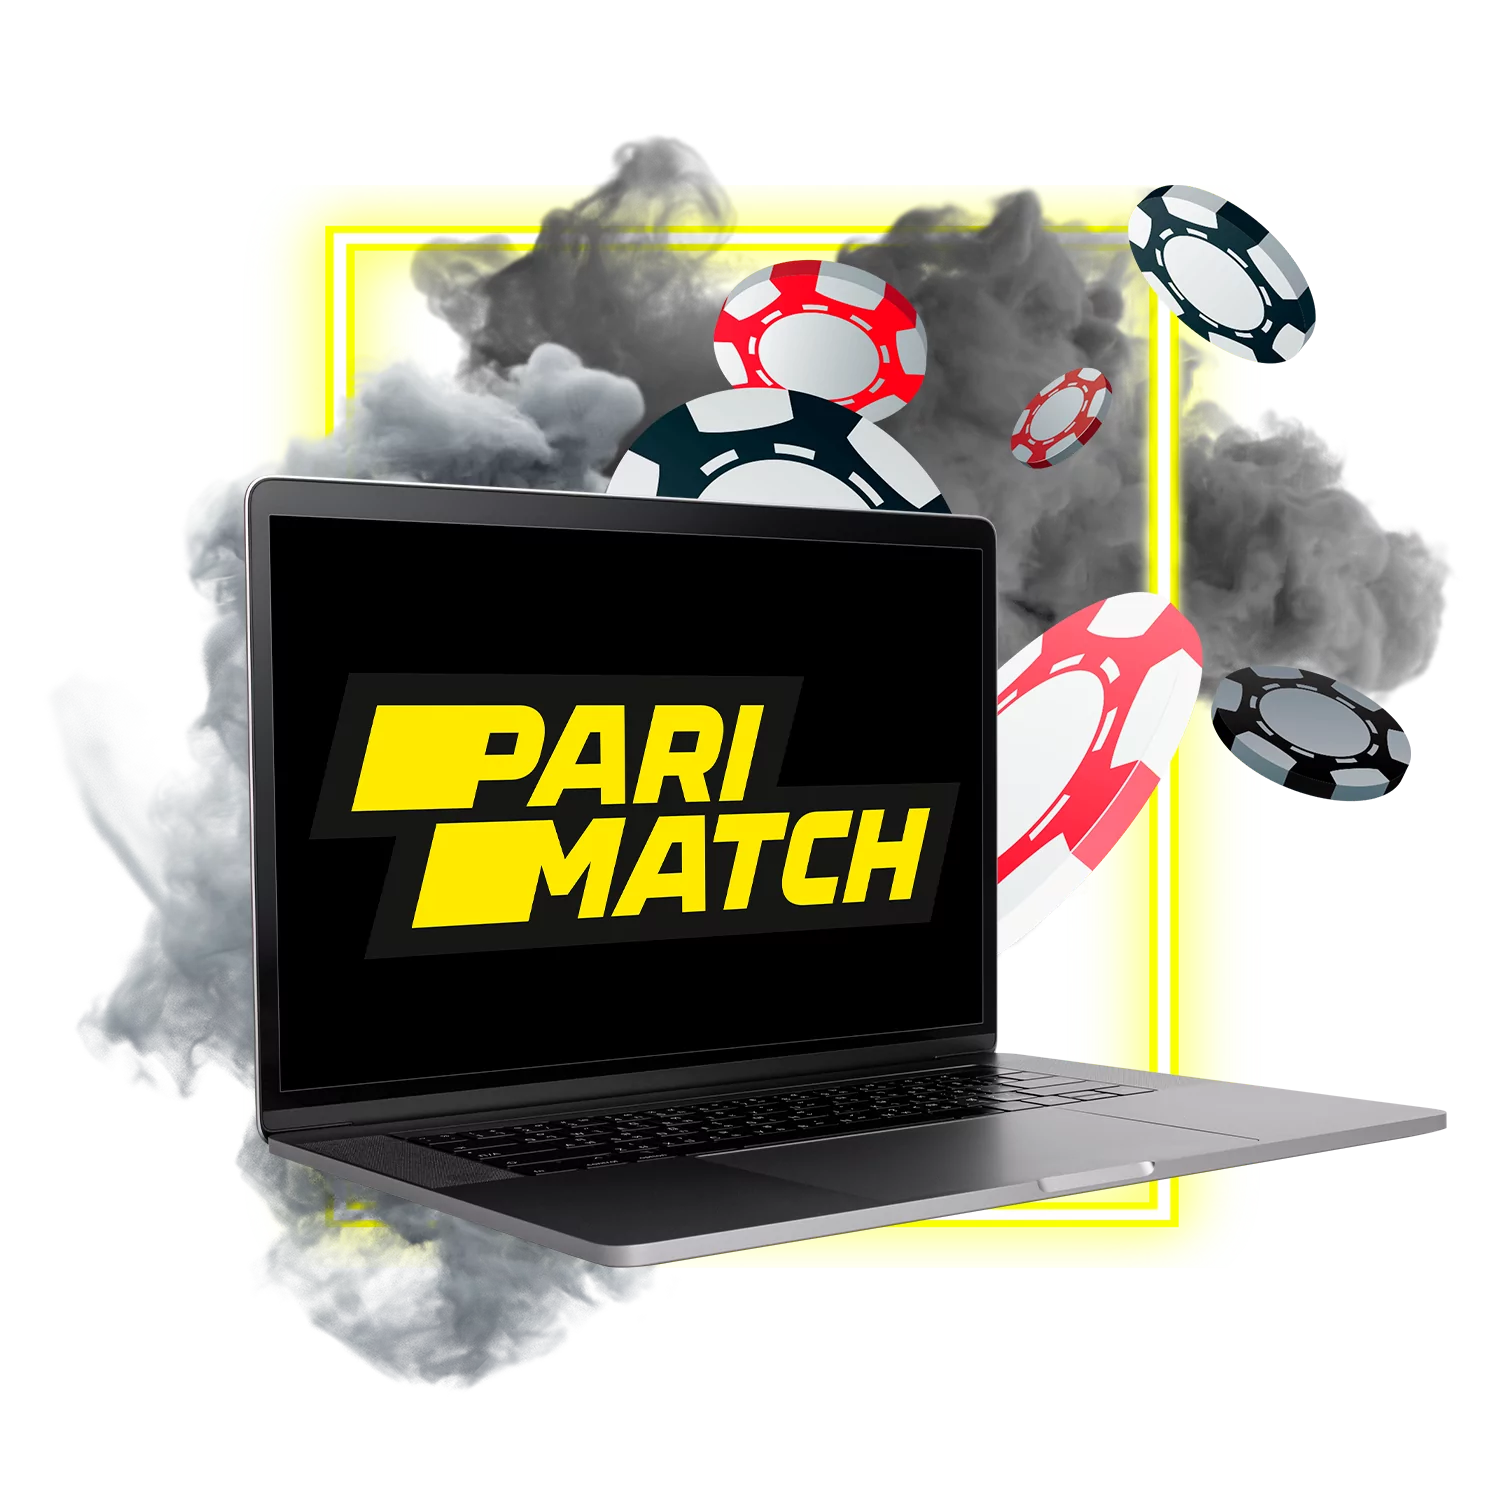 Learn how to play table games and win with Parimatch Casino.